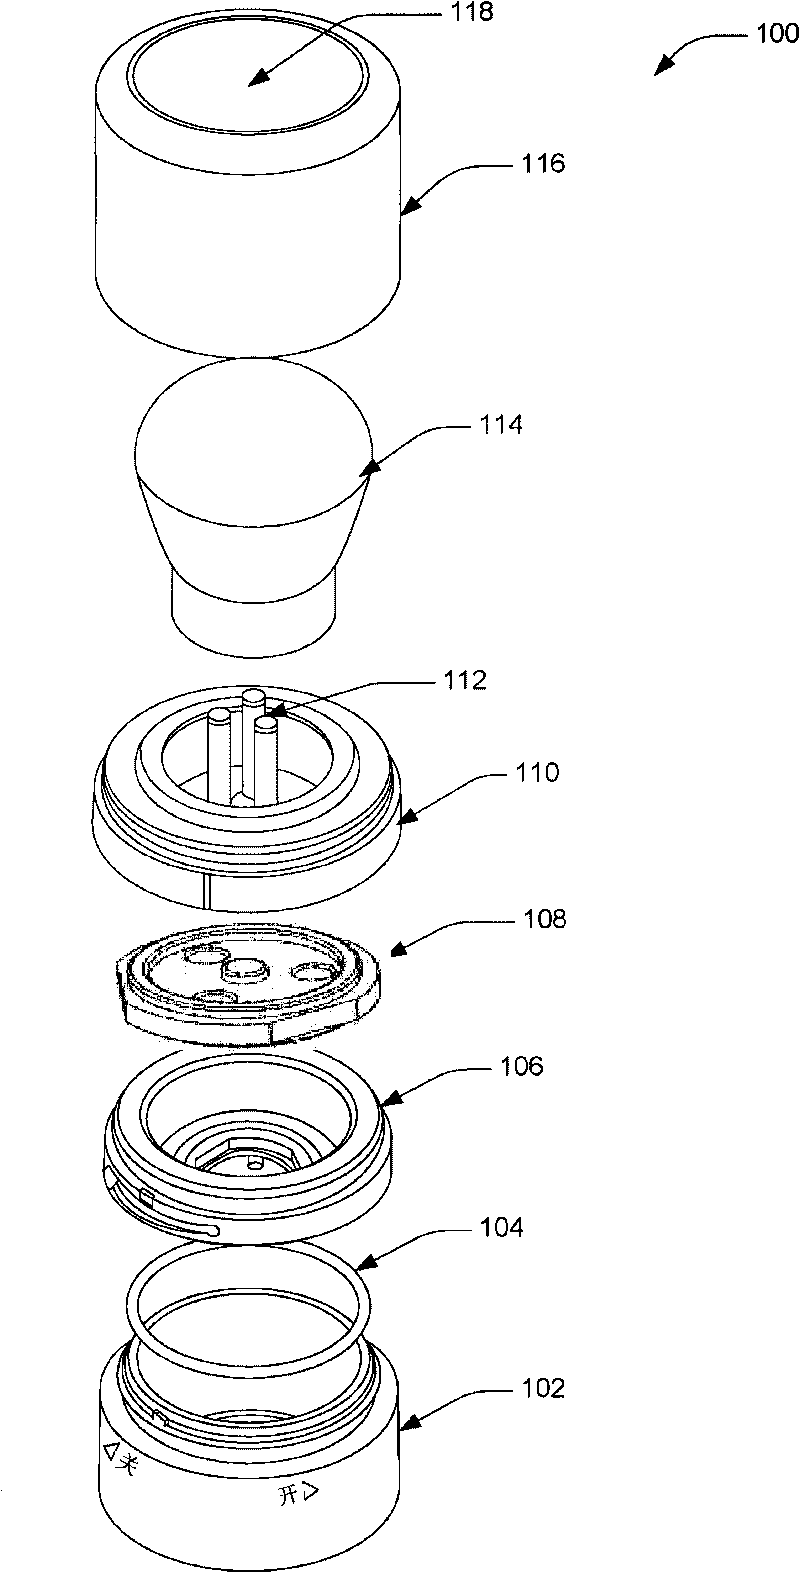 Dispenser with a flow-through compressible gasket